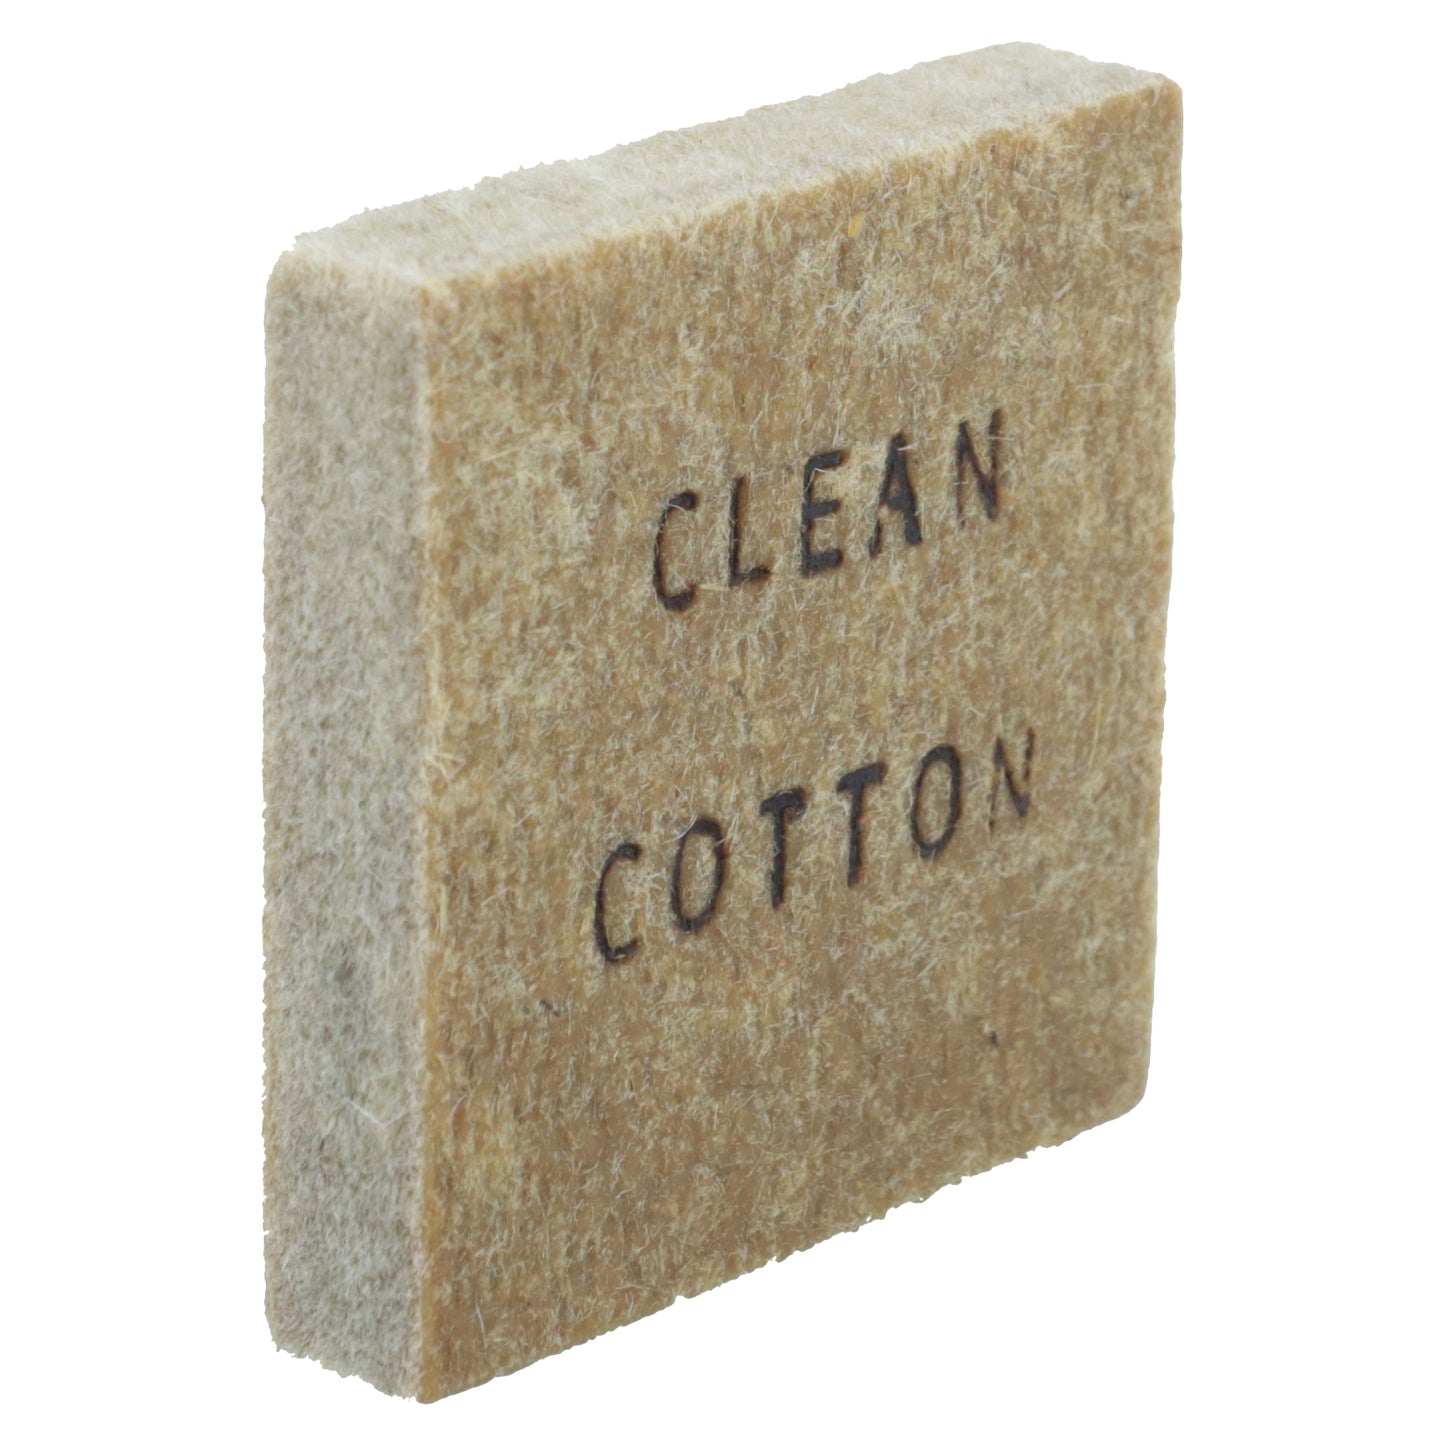 Clean Cotton Wafers - 5 per bag